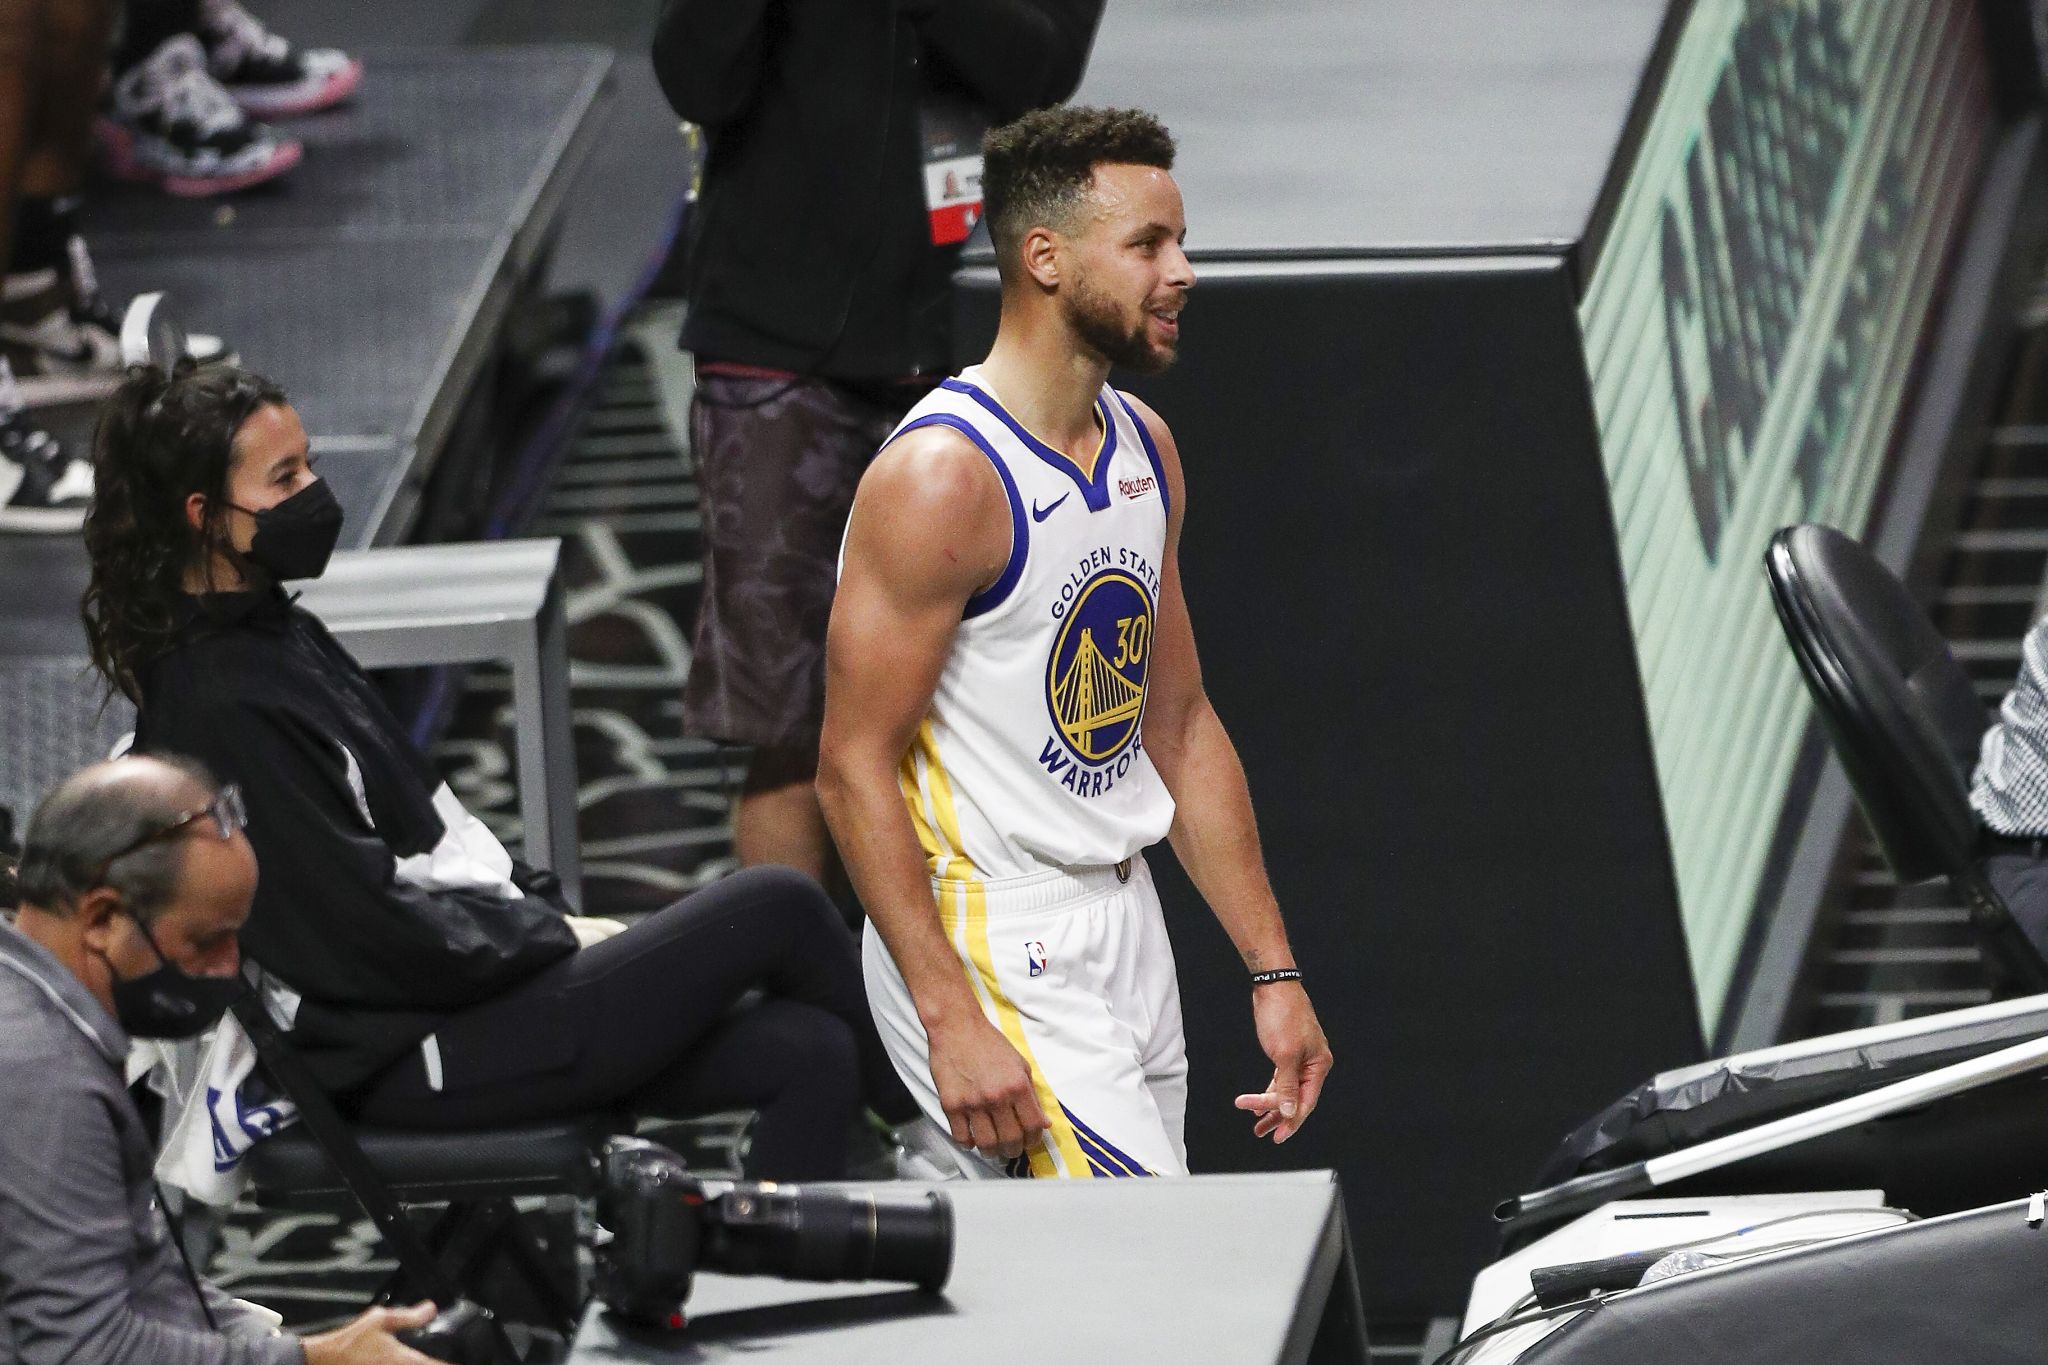 During the explosion defeat, Steph Curry gives a rare tirade to his teammates